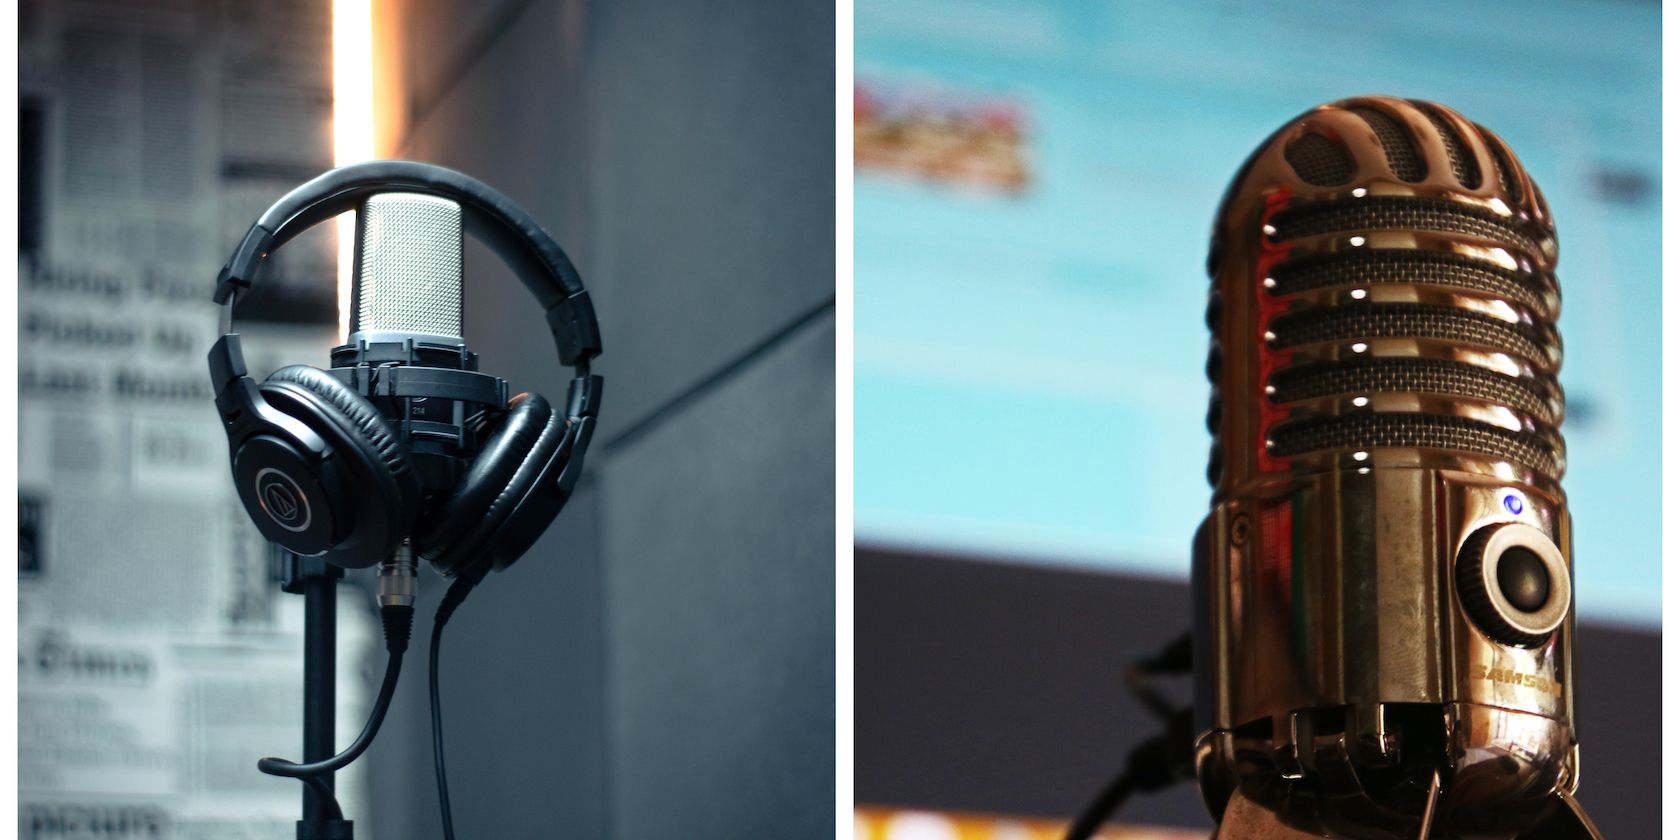 A side by side picture of an XLR microphone and a USB microphone.